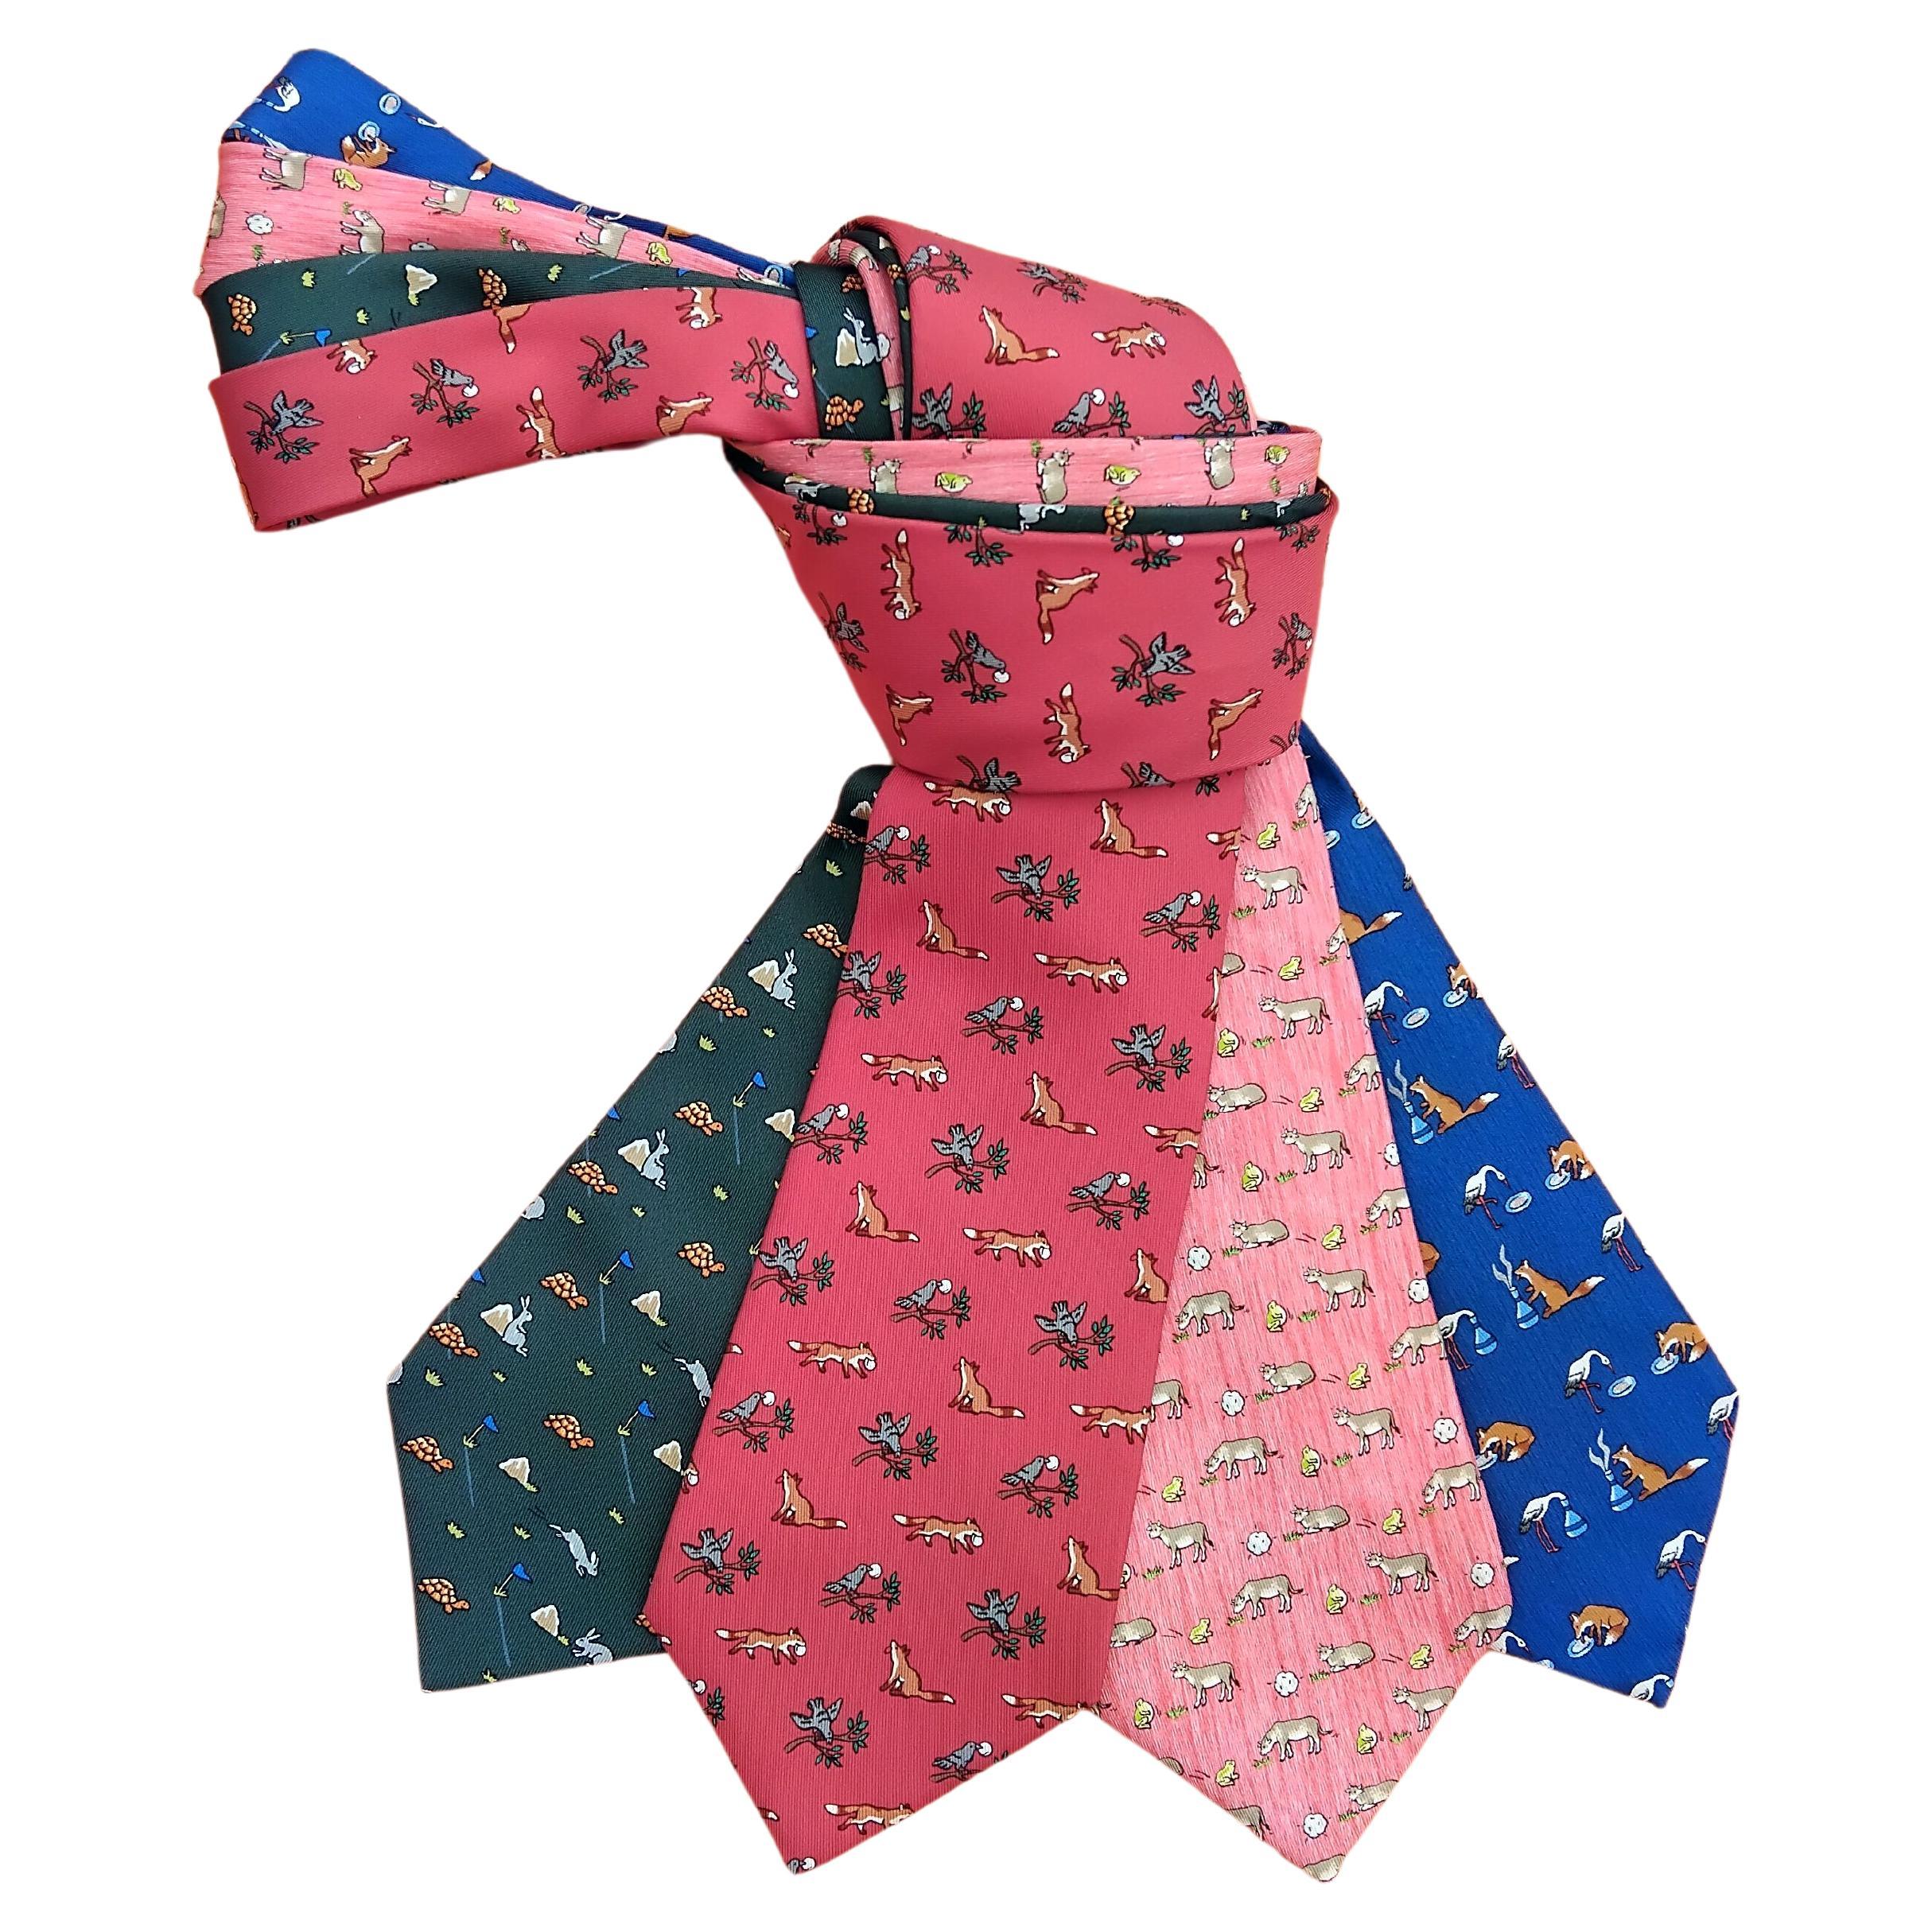 Exceptional Set of 4 Hermès Ties from The Fables of La Fontaine in Silk For Sale